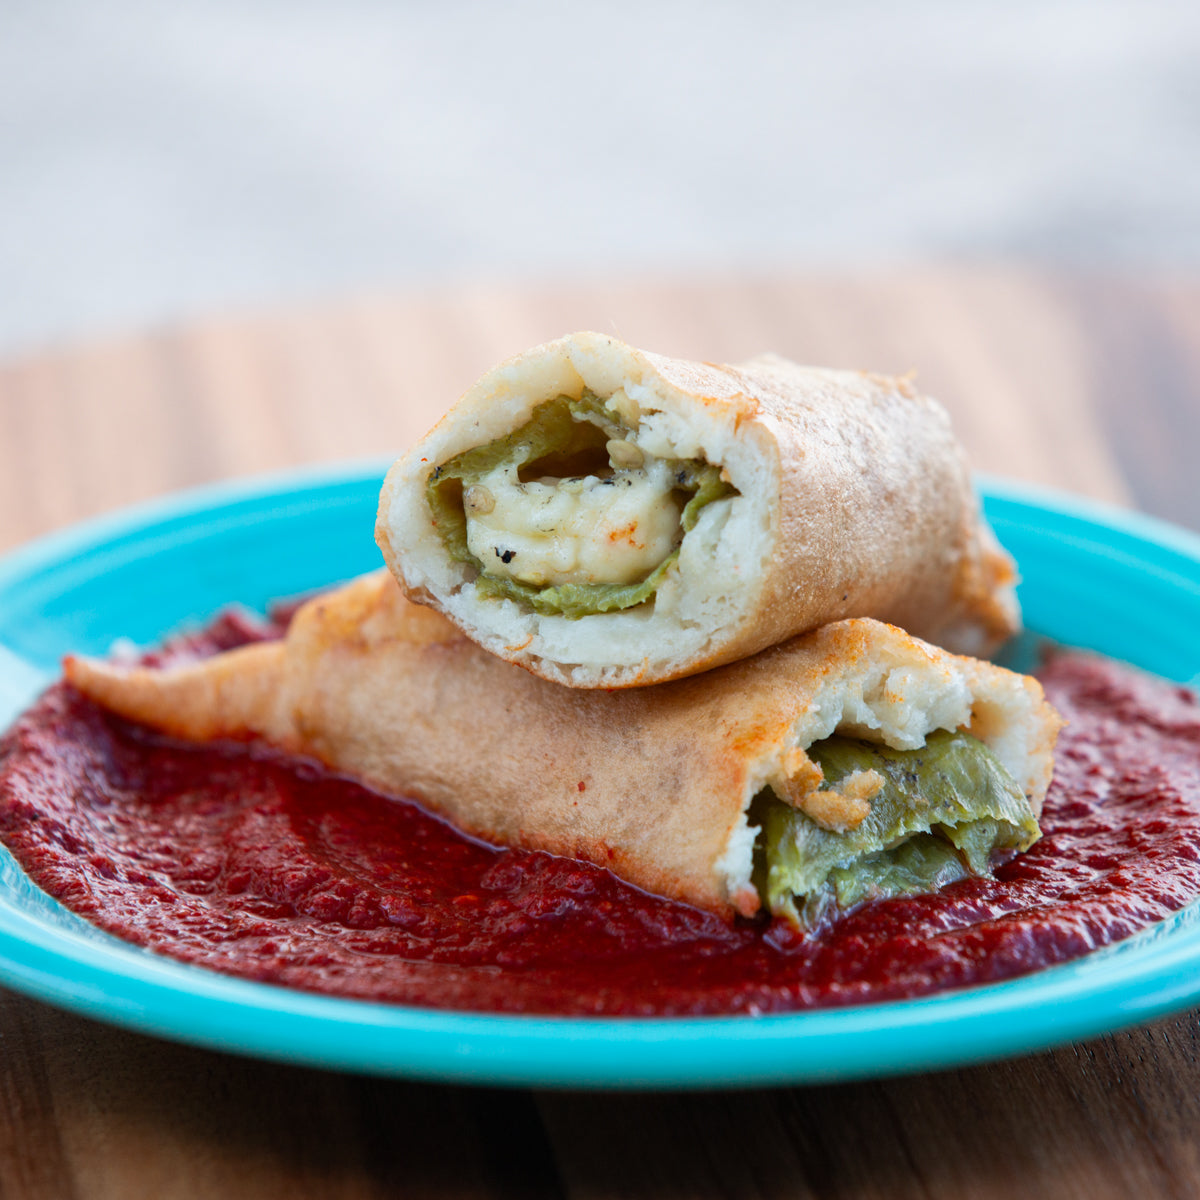 A close-up of a halved breakfast burrito on a blue plate with a red sauce, revealing its filling of scrambled eggs and Hatch Chile Rellenos.